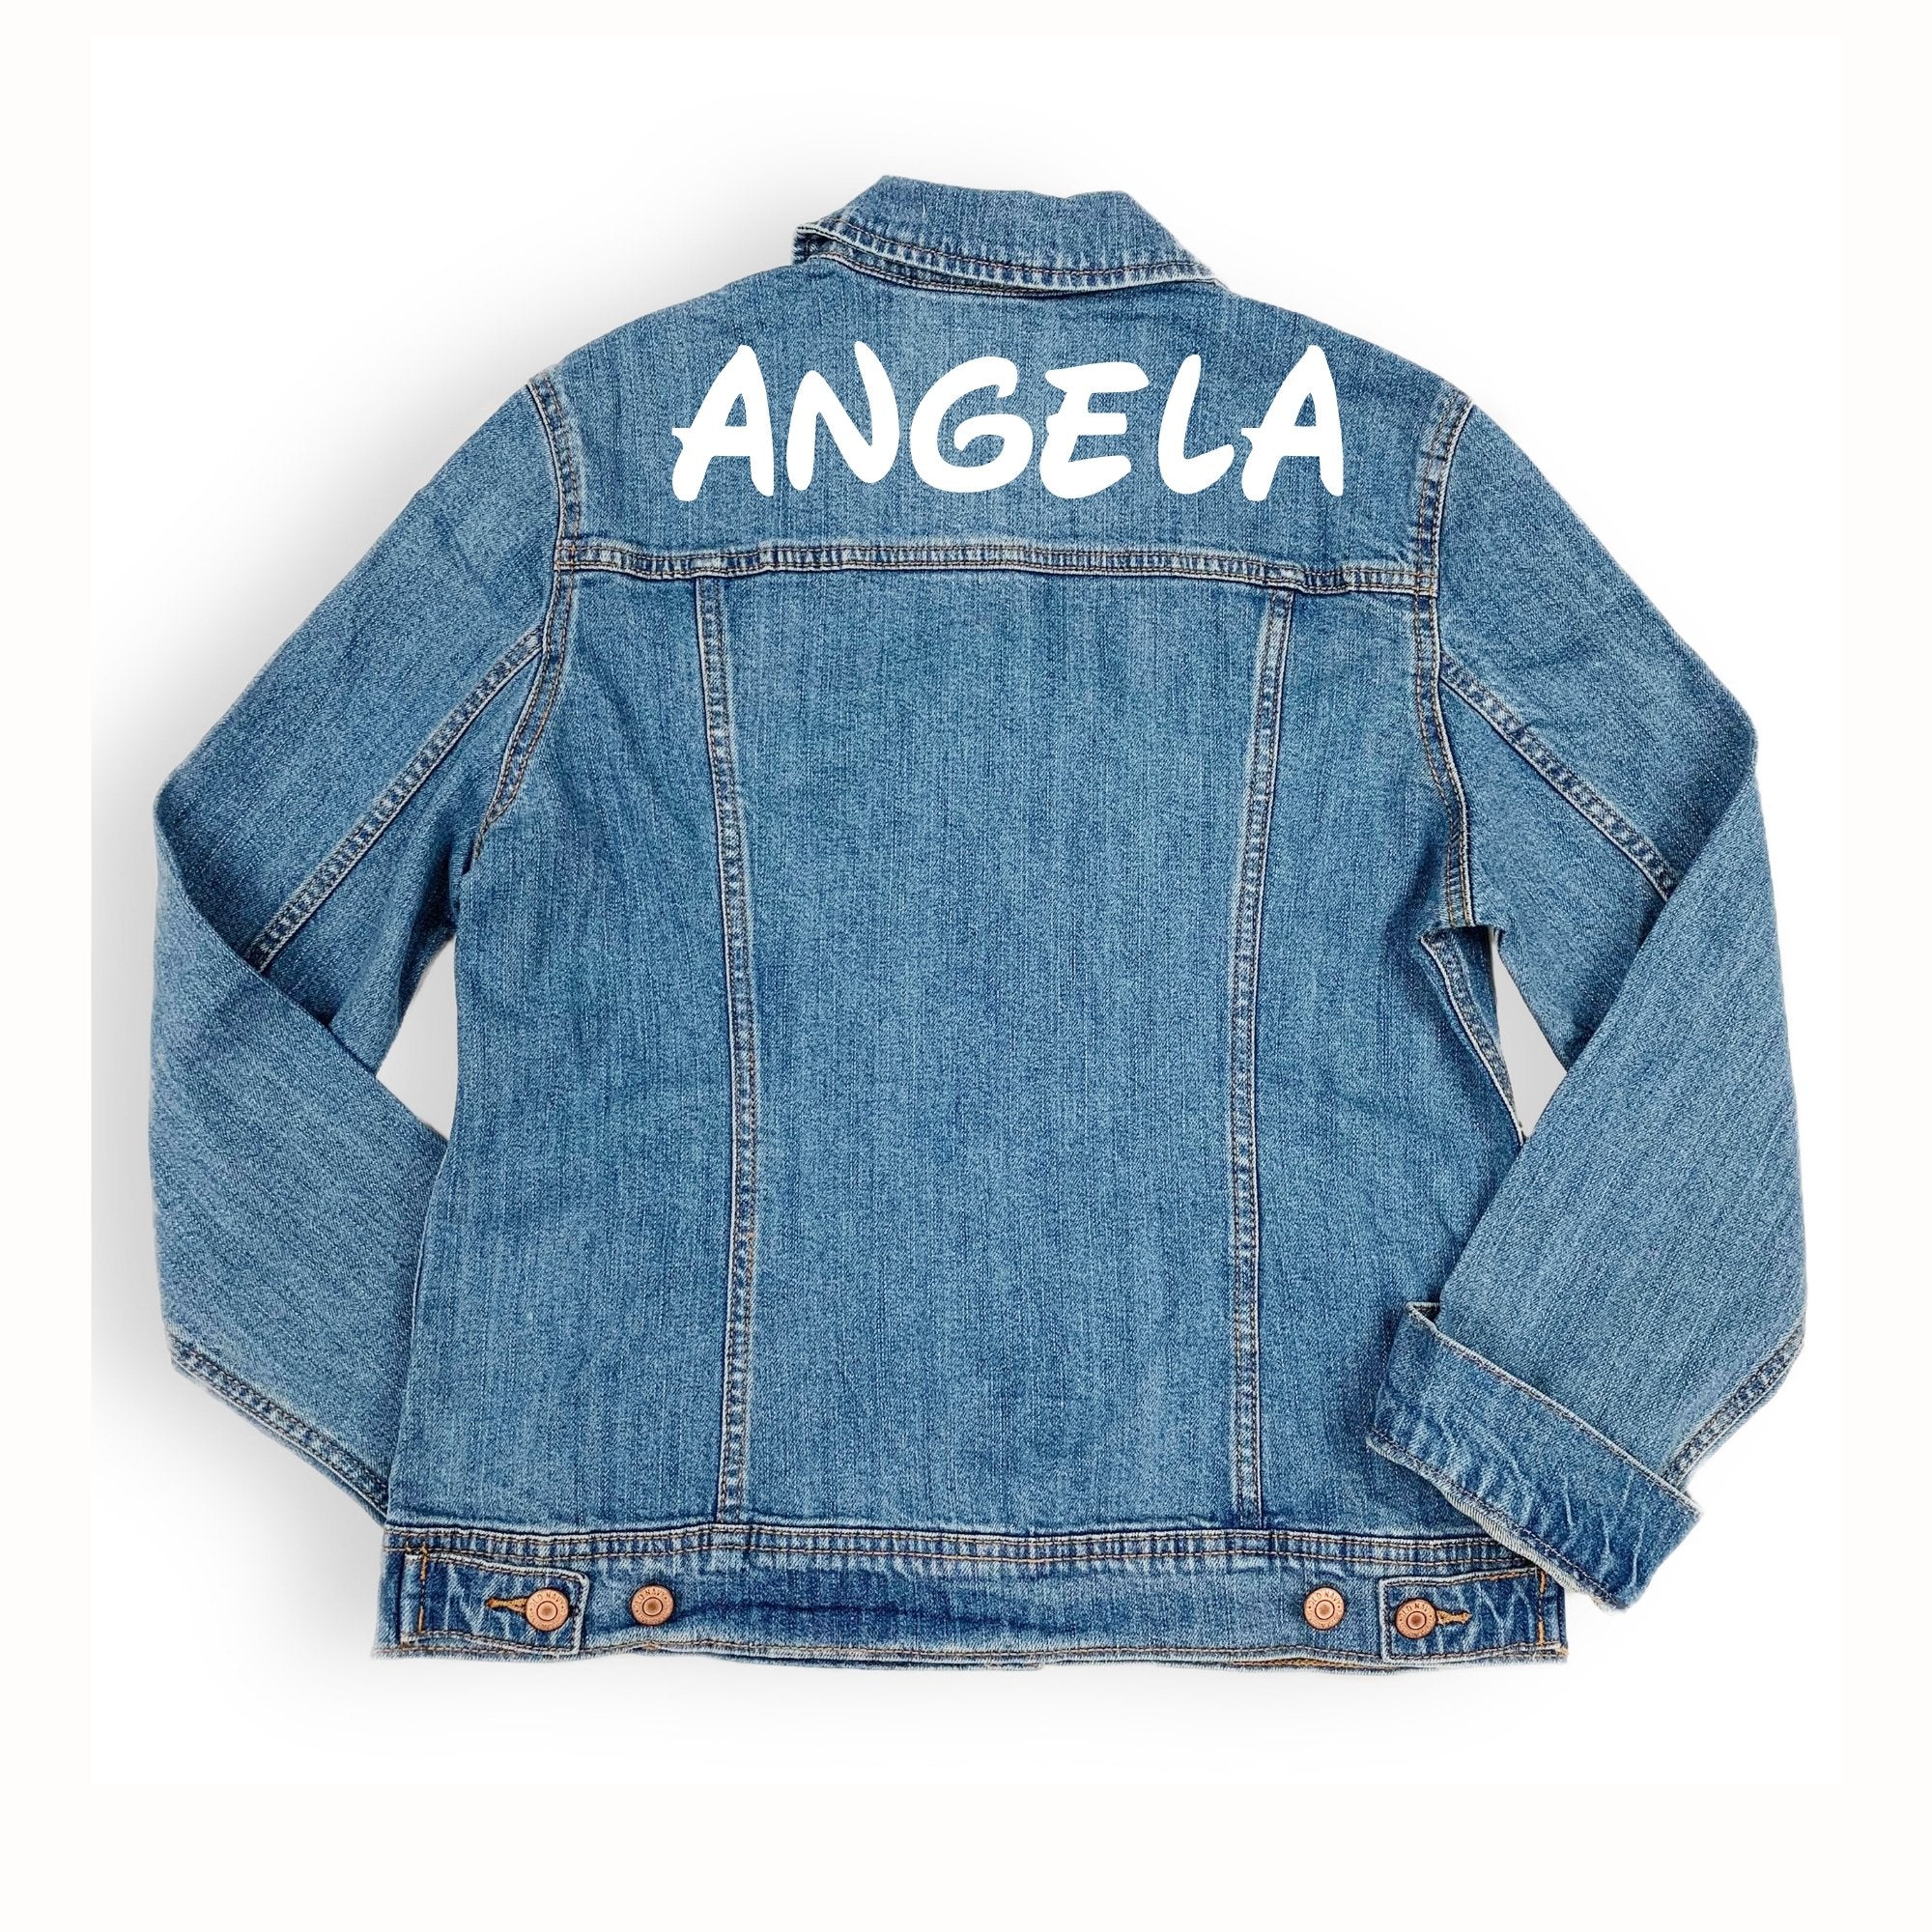 A denim jacket is customized with "Angela" across the shoulders in a white font.